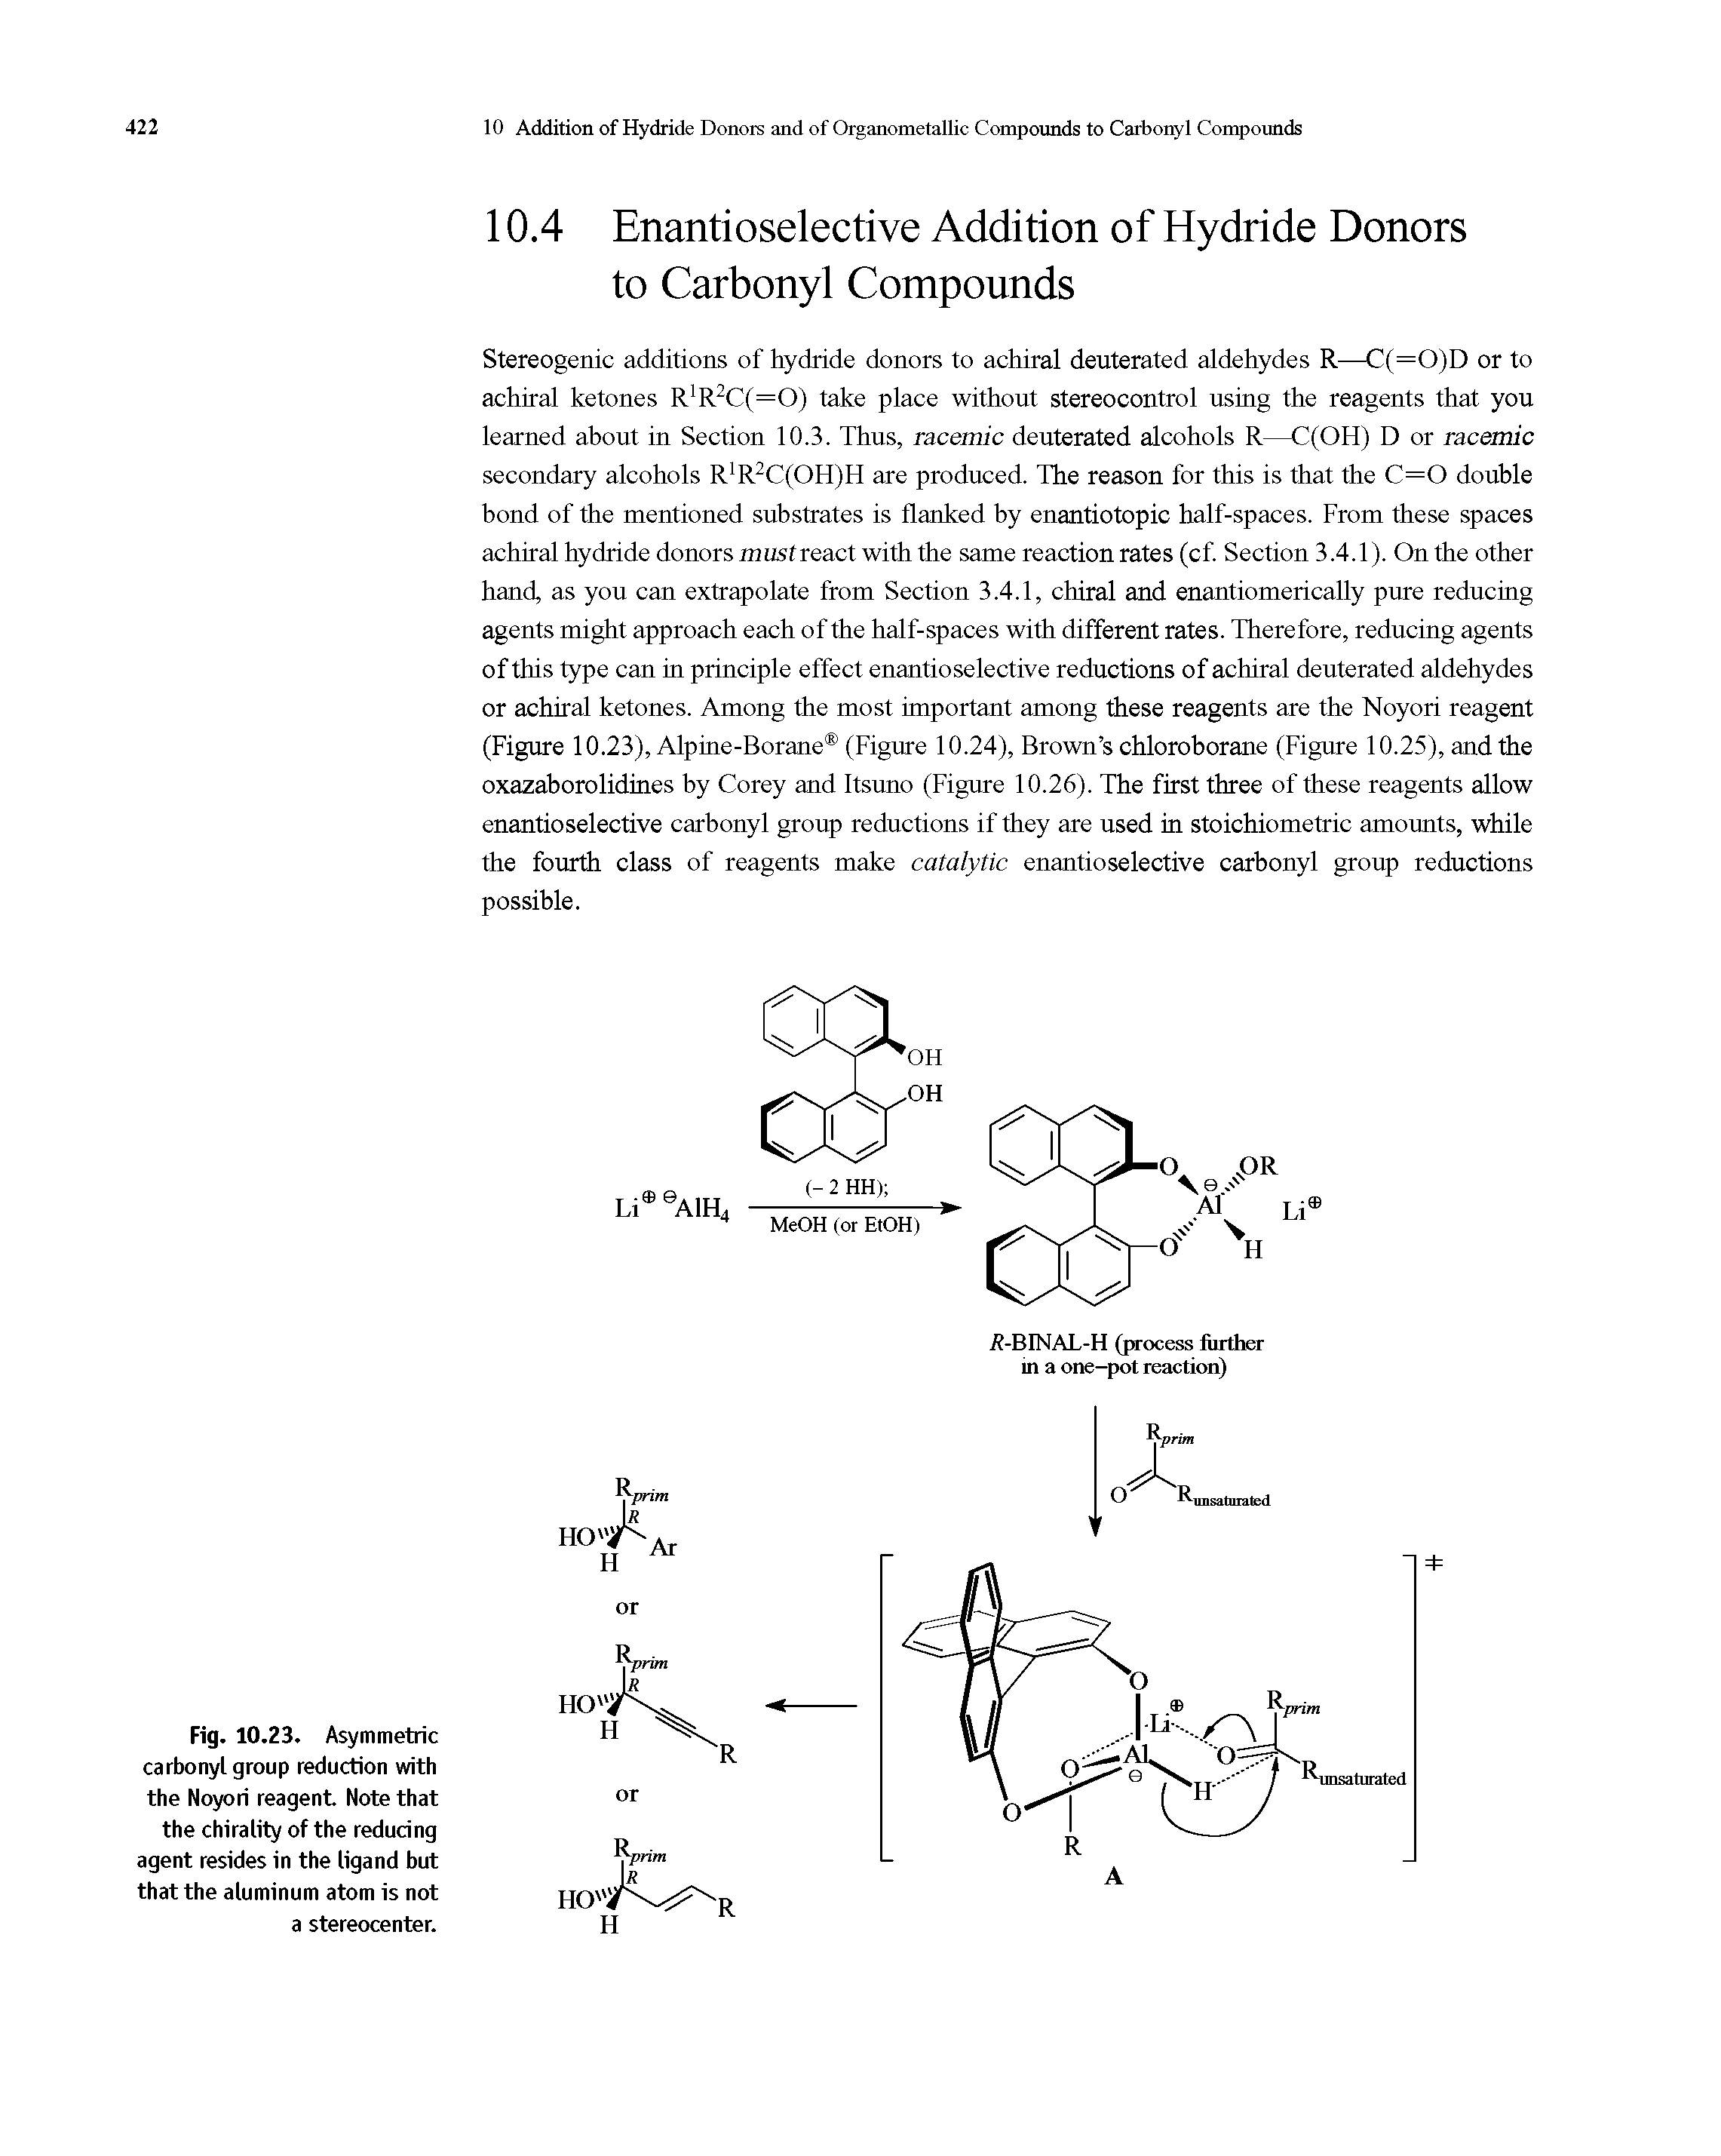 Fig. 10.23. Asymmetric carbonyl group reduction with the Noyori reagent Note that the chirality of the reducing agent resides in the ligand but that the aluminum atom is not a stereocenter.